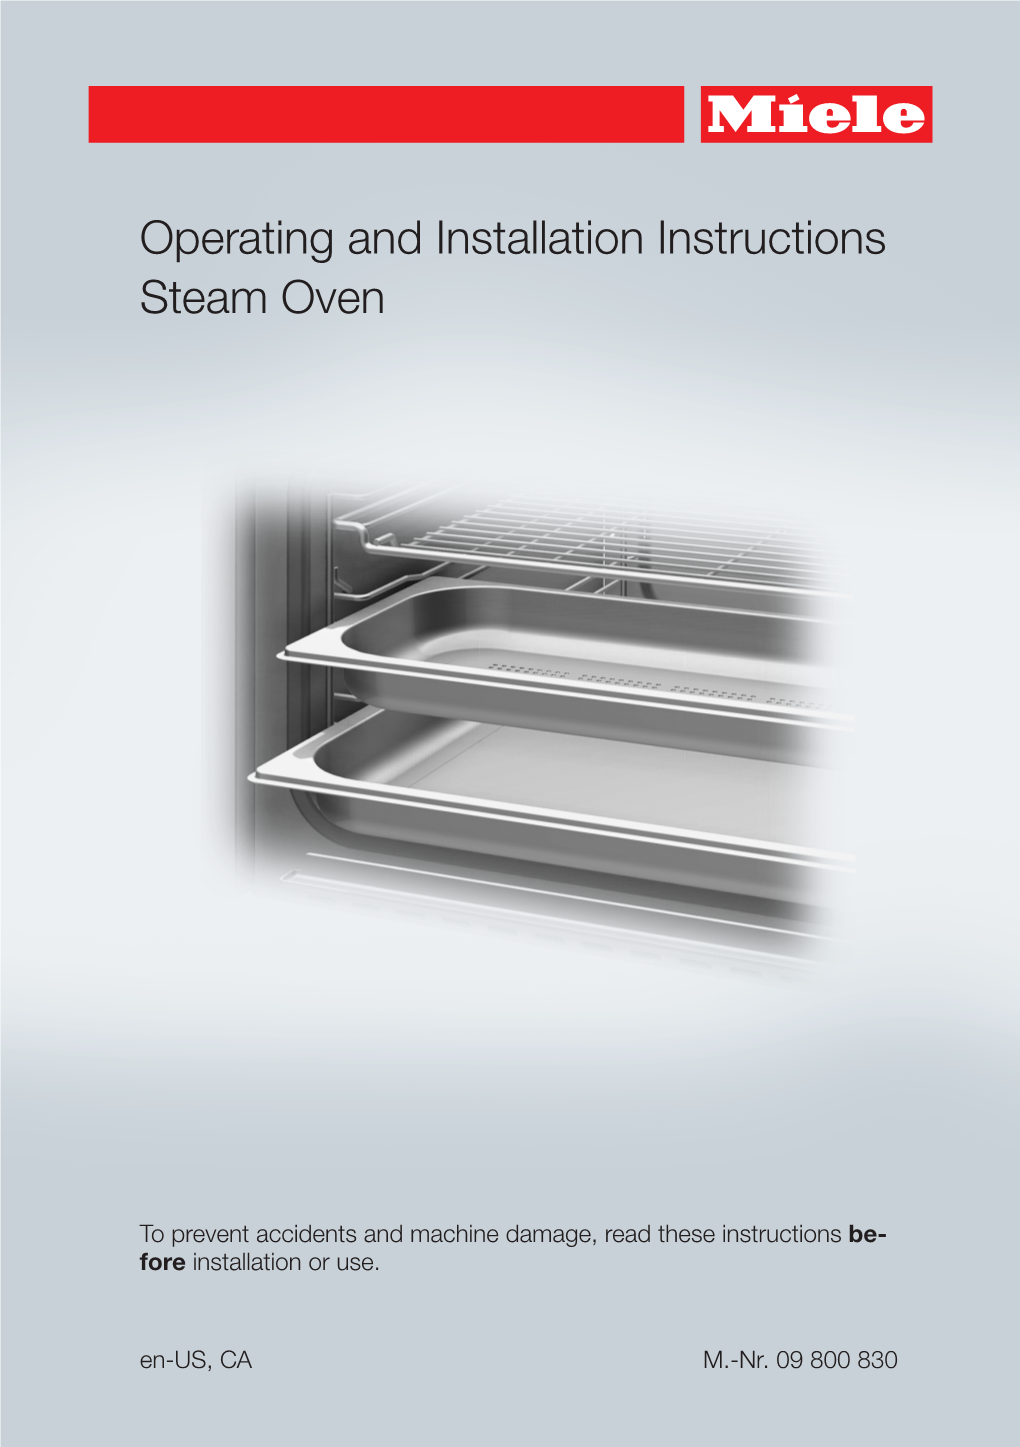 Operating and Installation Instructions Steam Oven